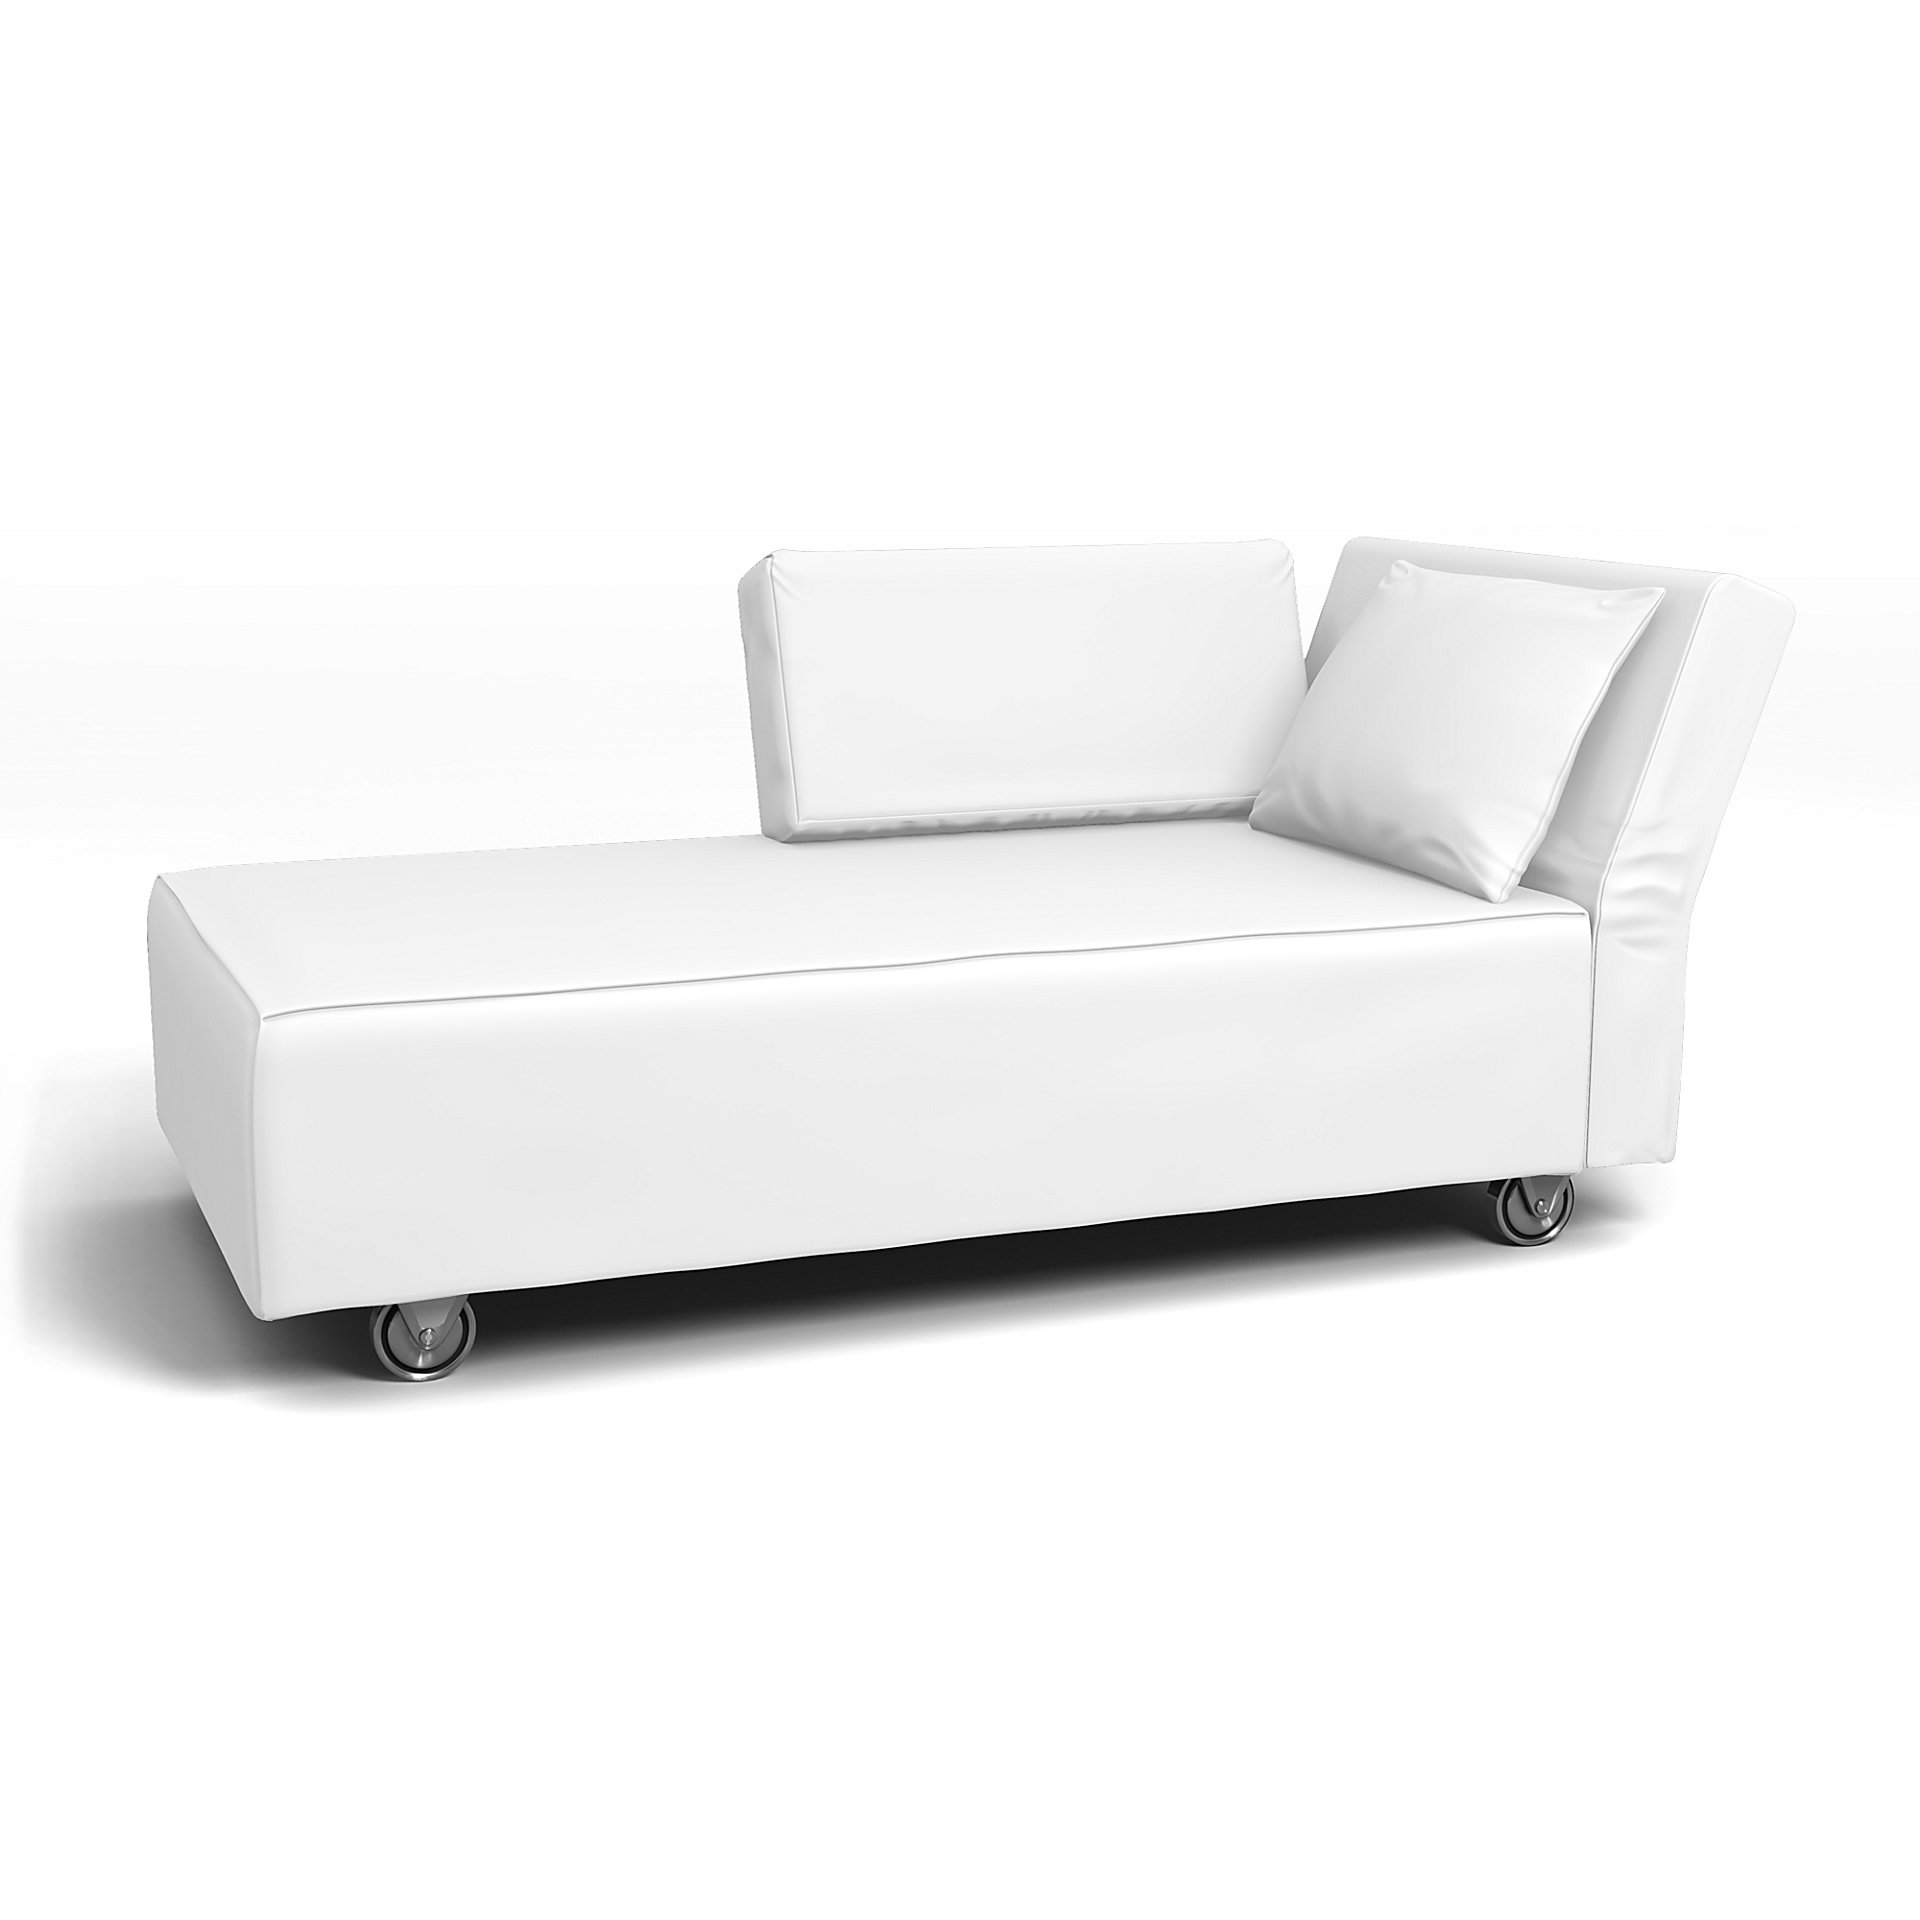 IKEA - Falsterbo Chaise with Right Armrest Cover, Absolute White, Linen - Bemz